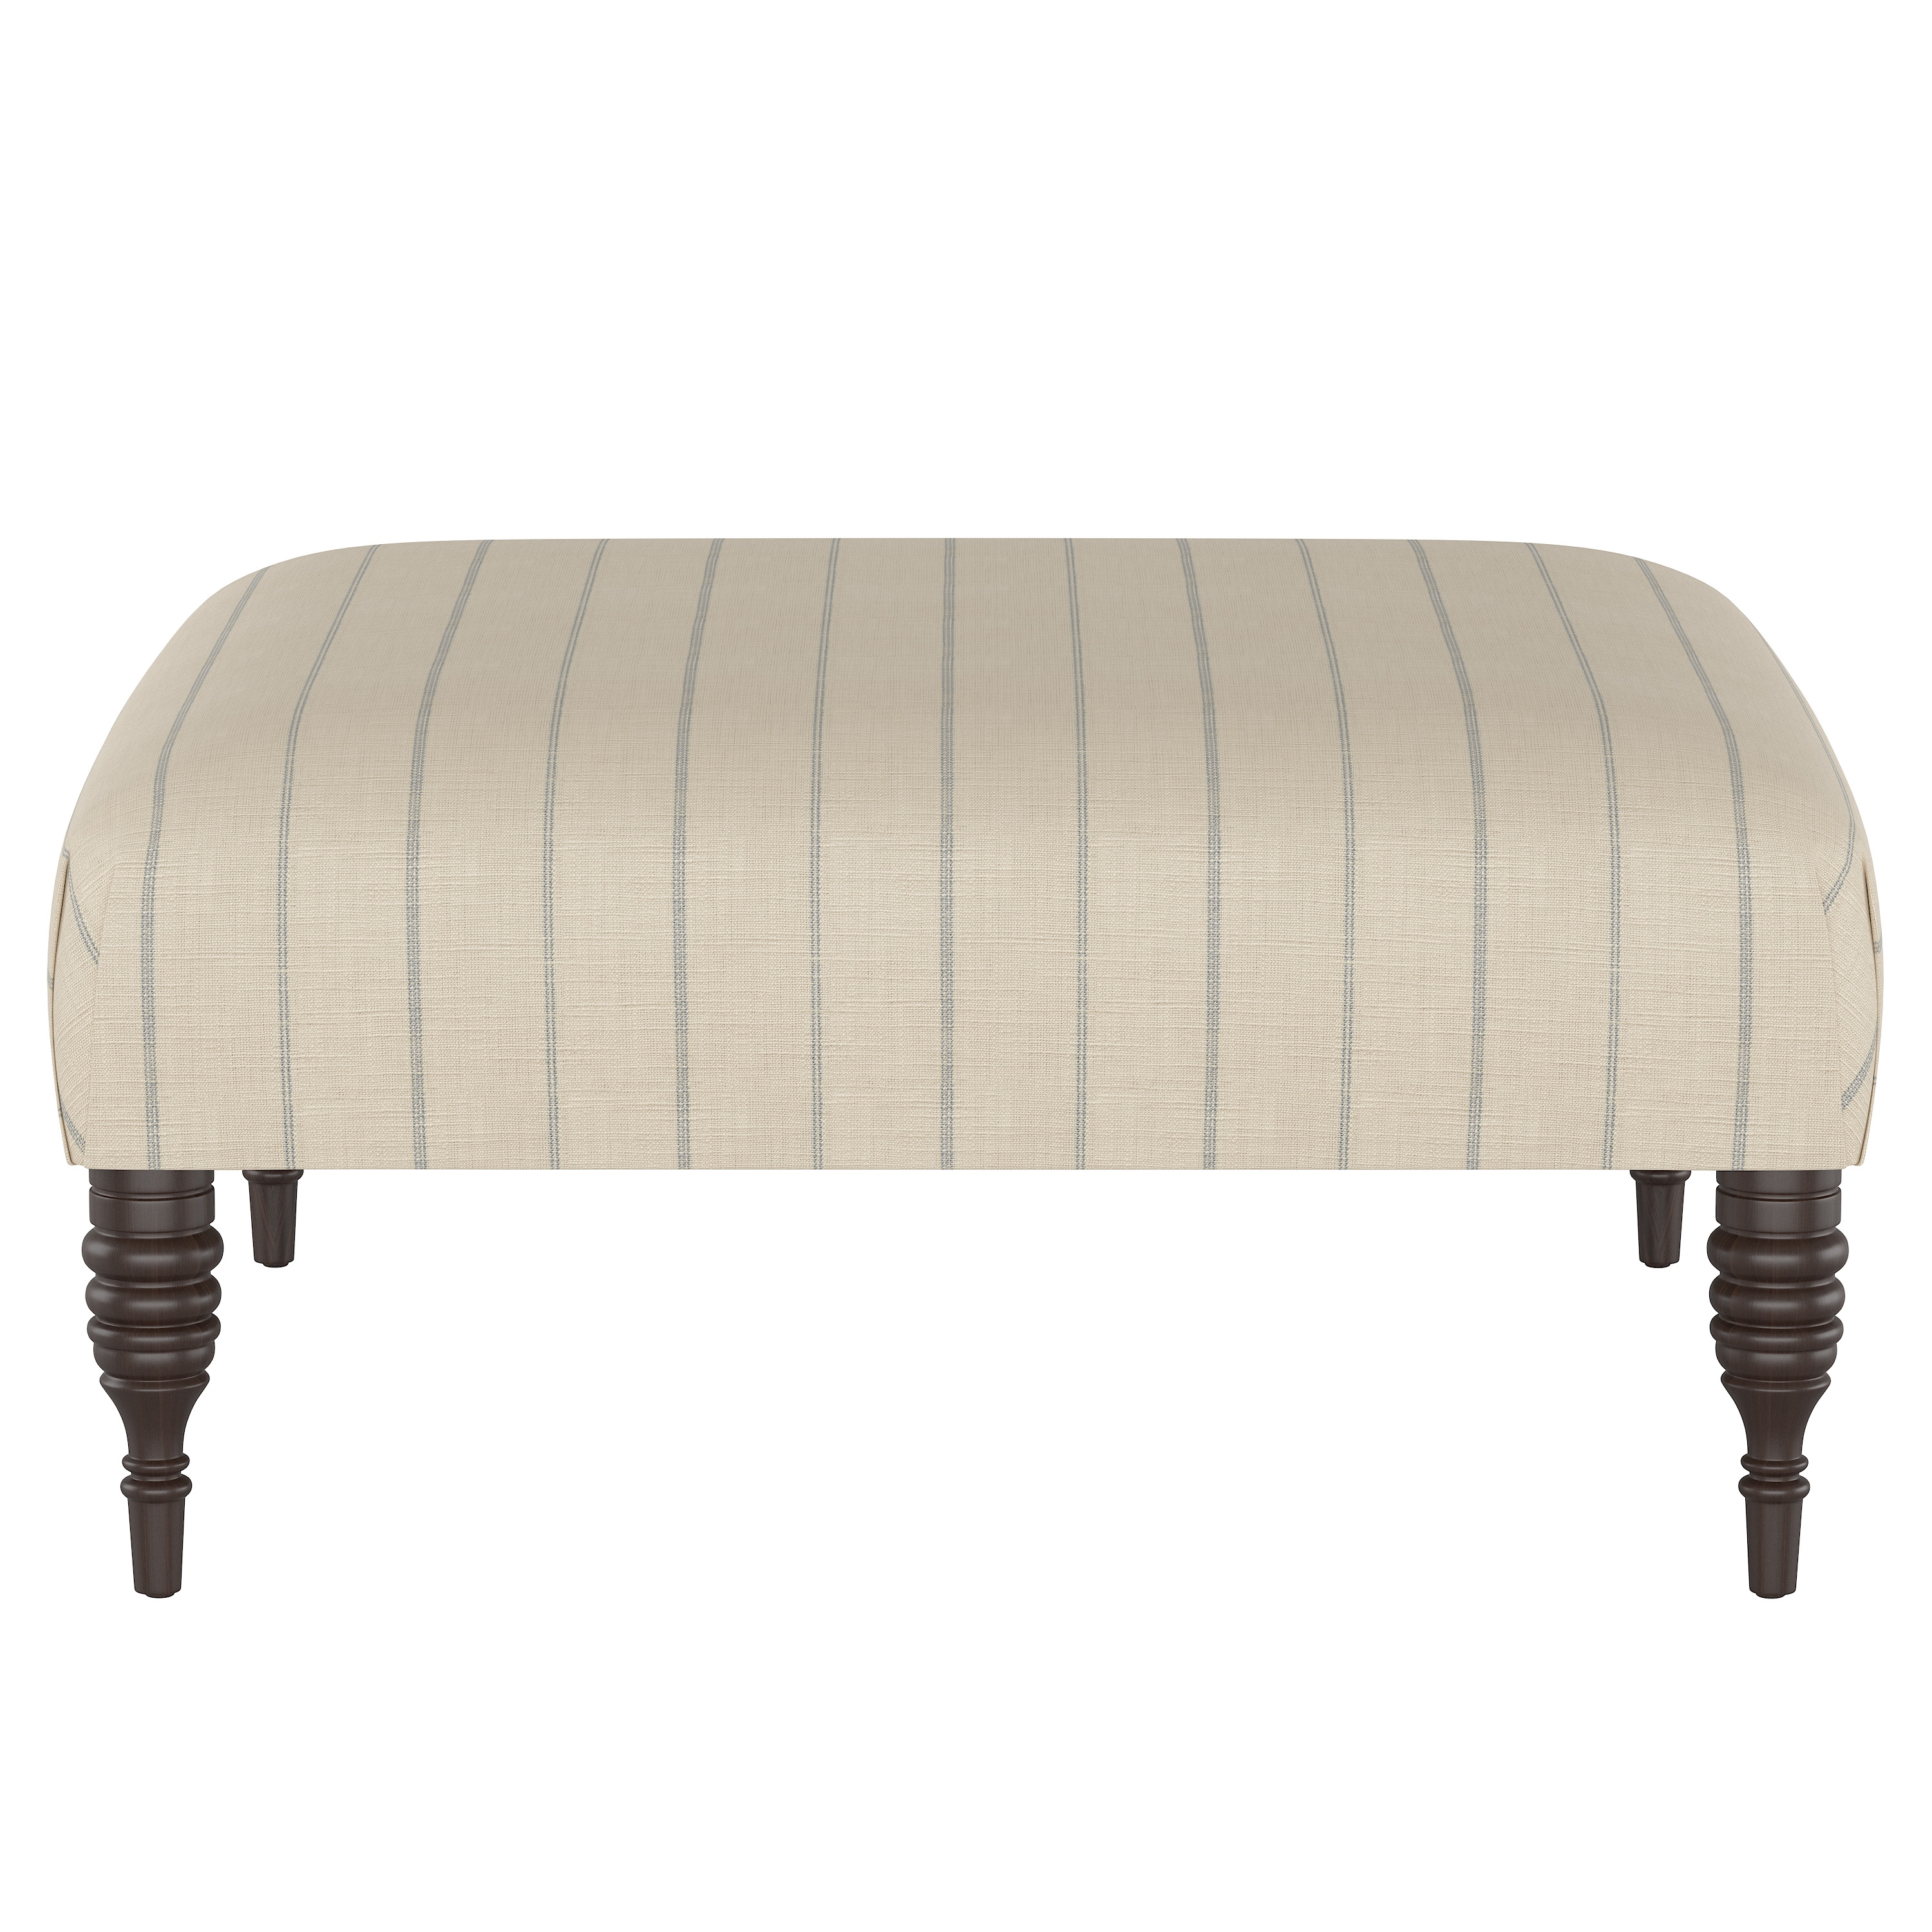 Algren Cocktail Ottoman with Turned Legs - Image 1